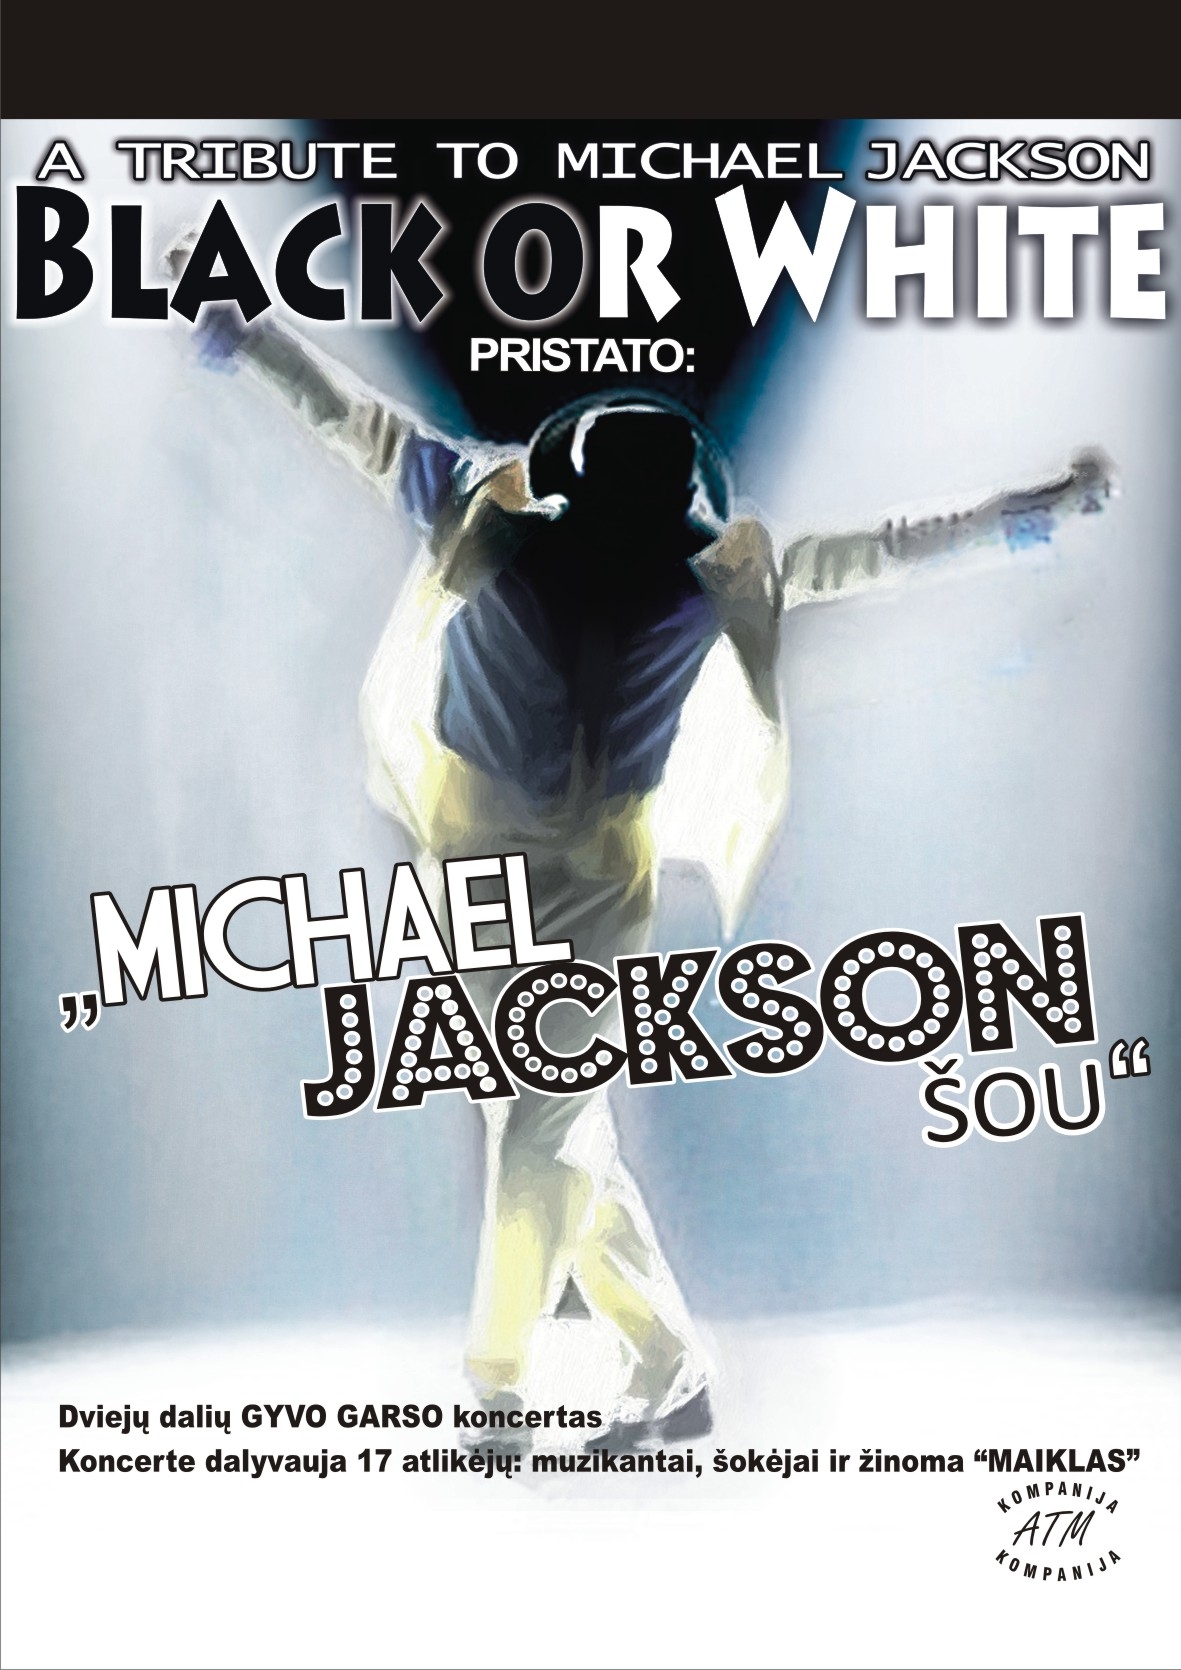 BLACK OR WHITE – A Tribute to Michael Jackson